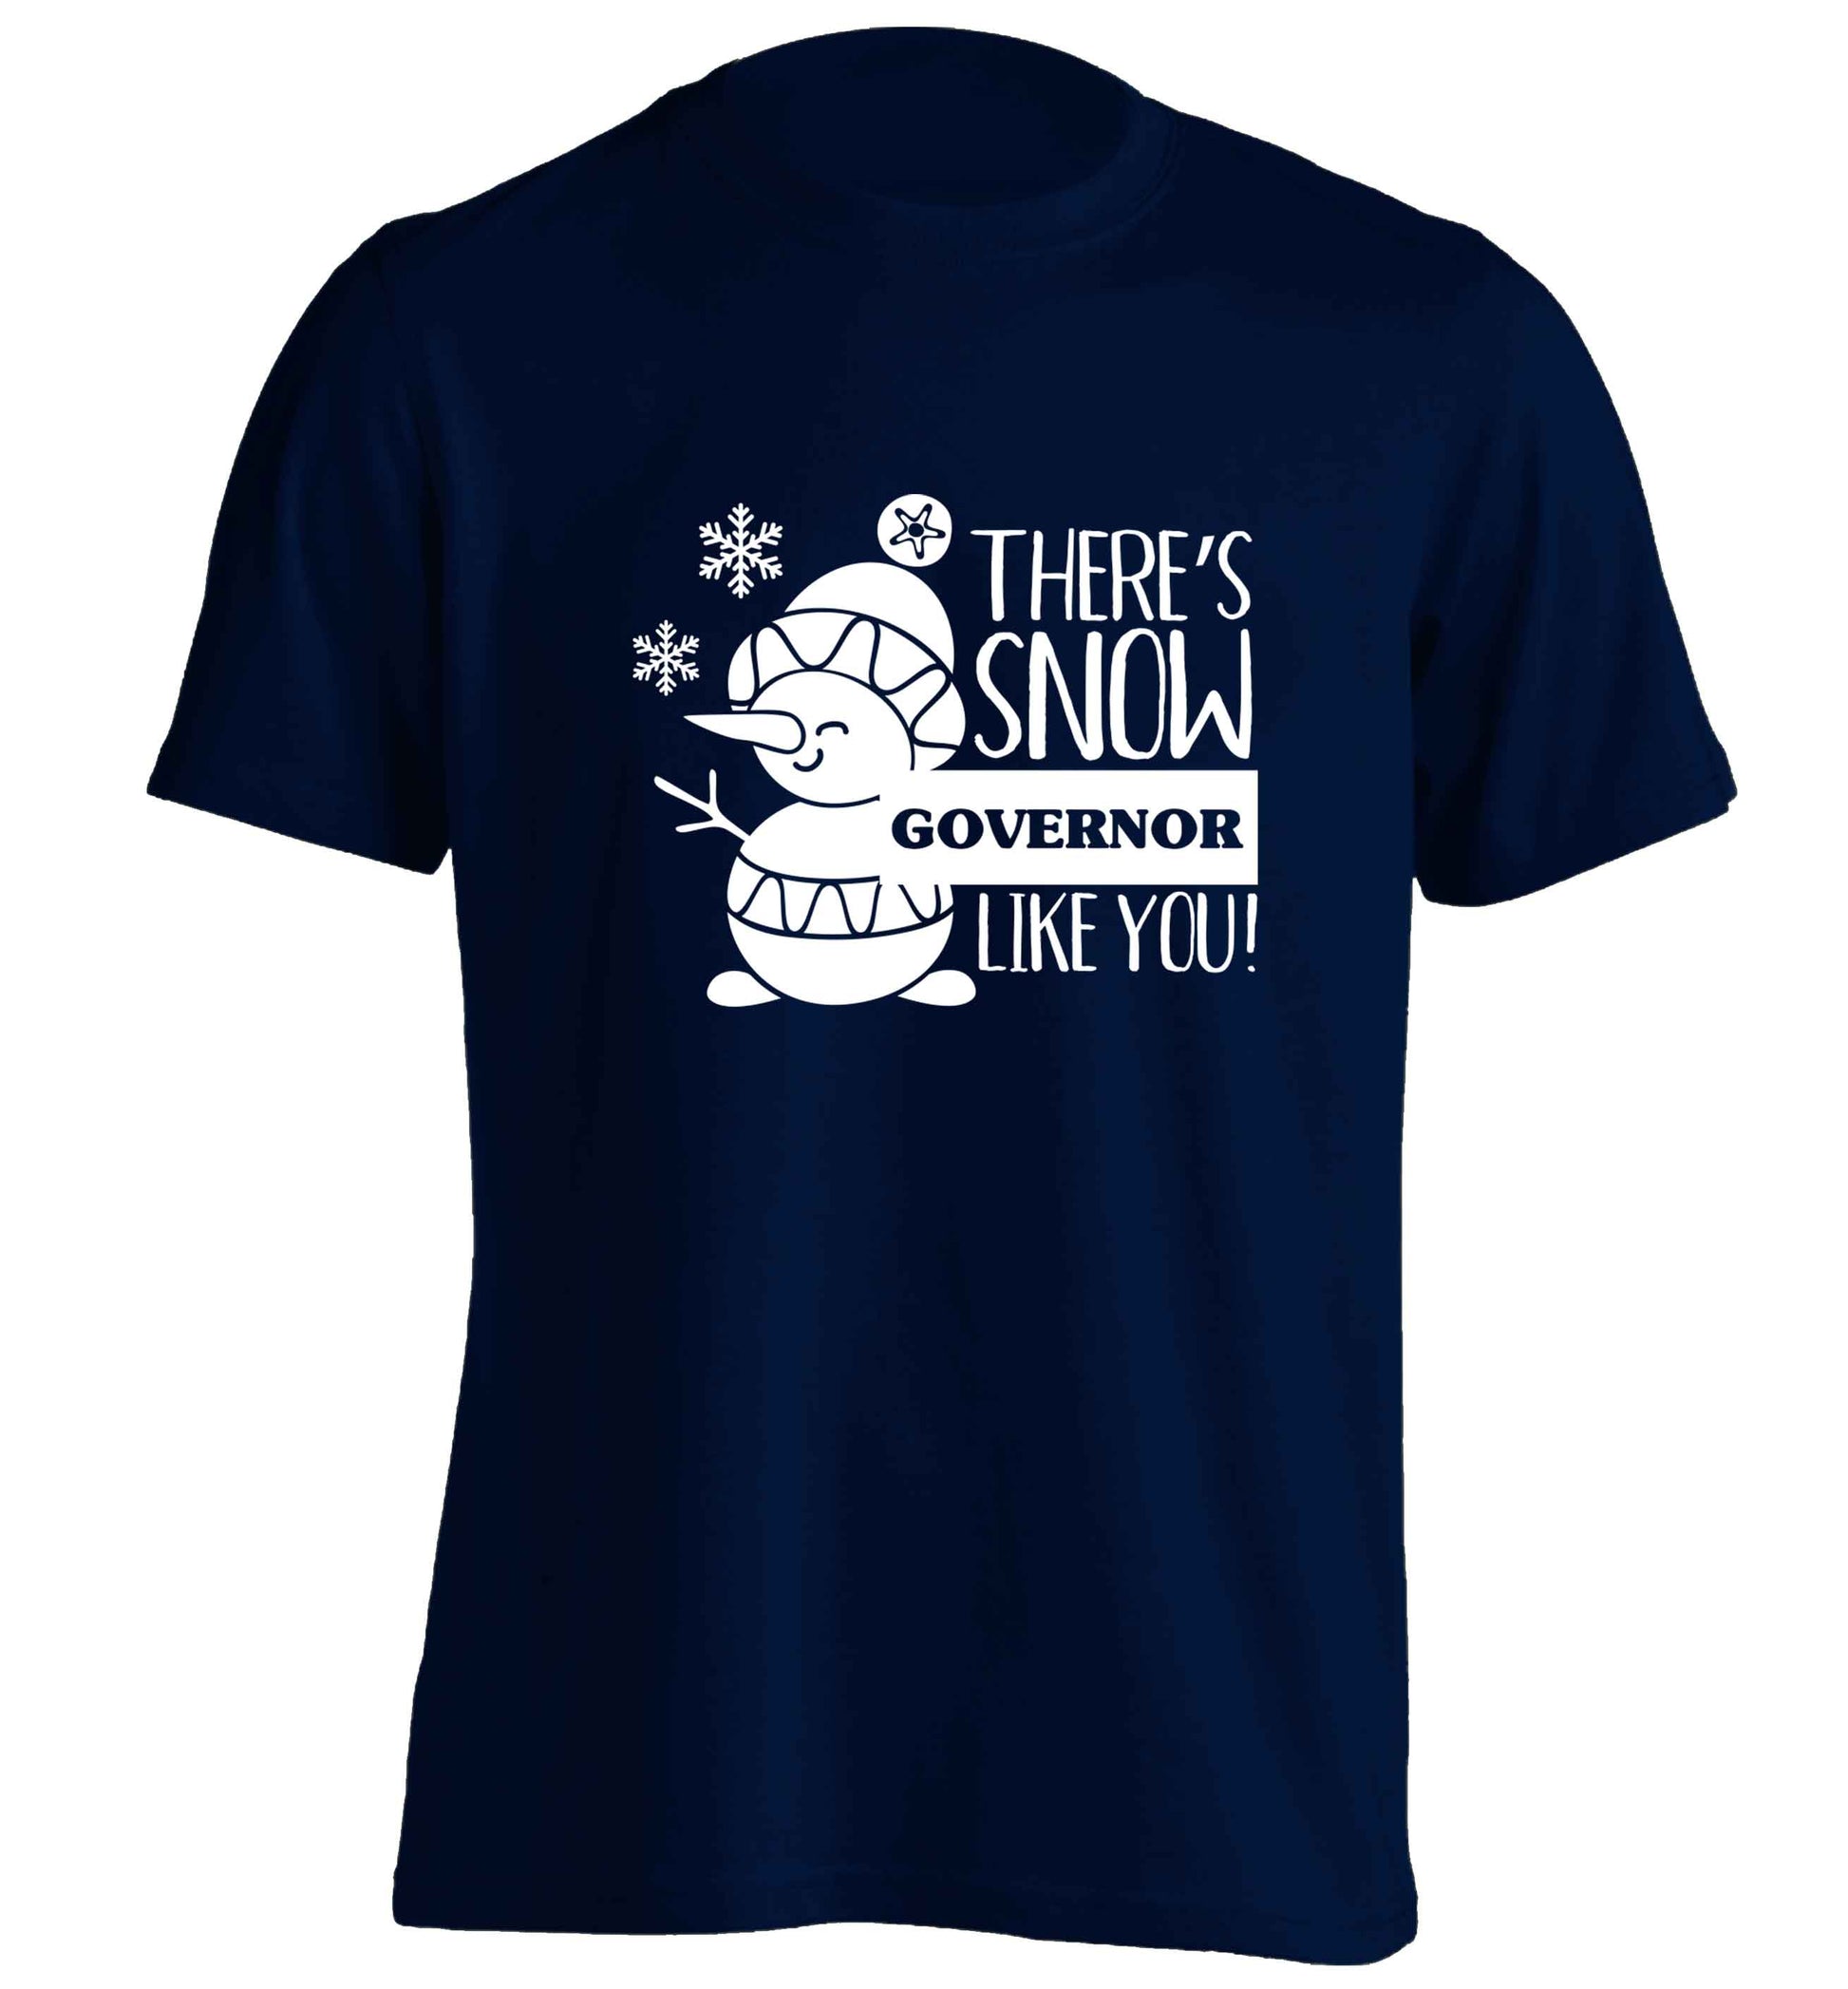 There's snow governor like you adults unisex navy Tshirt 2XL